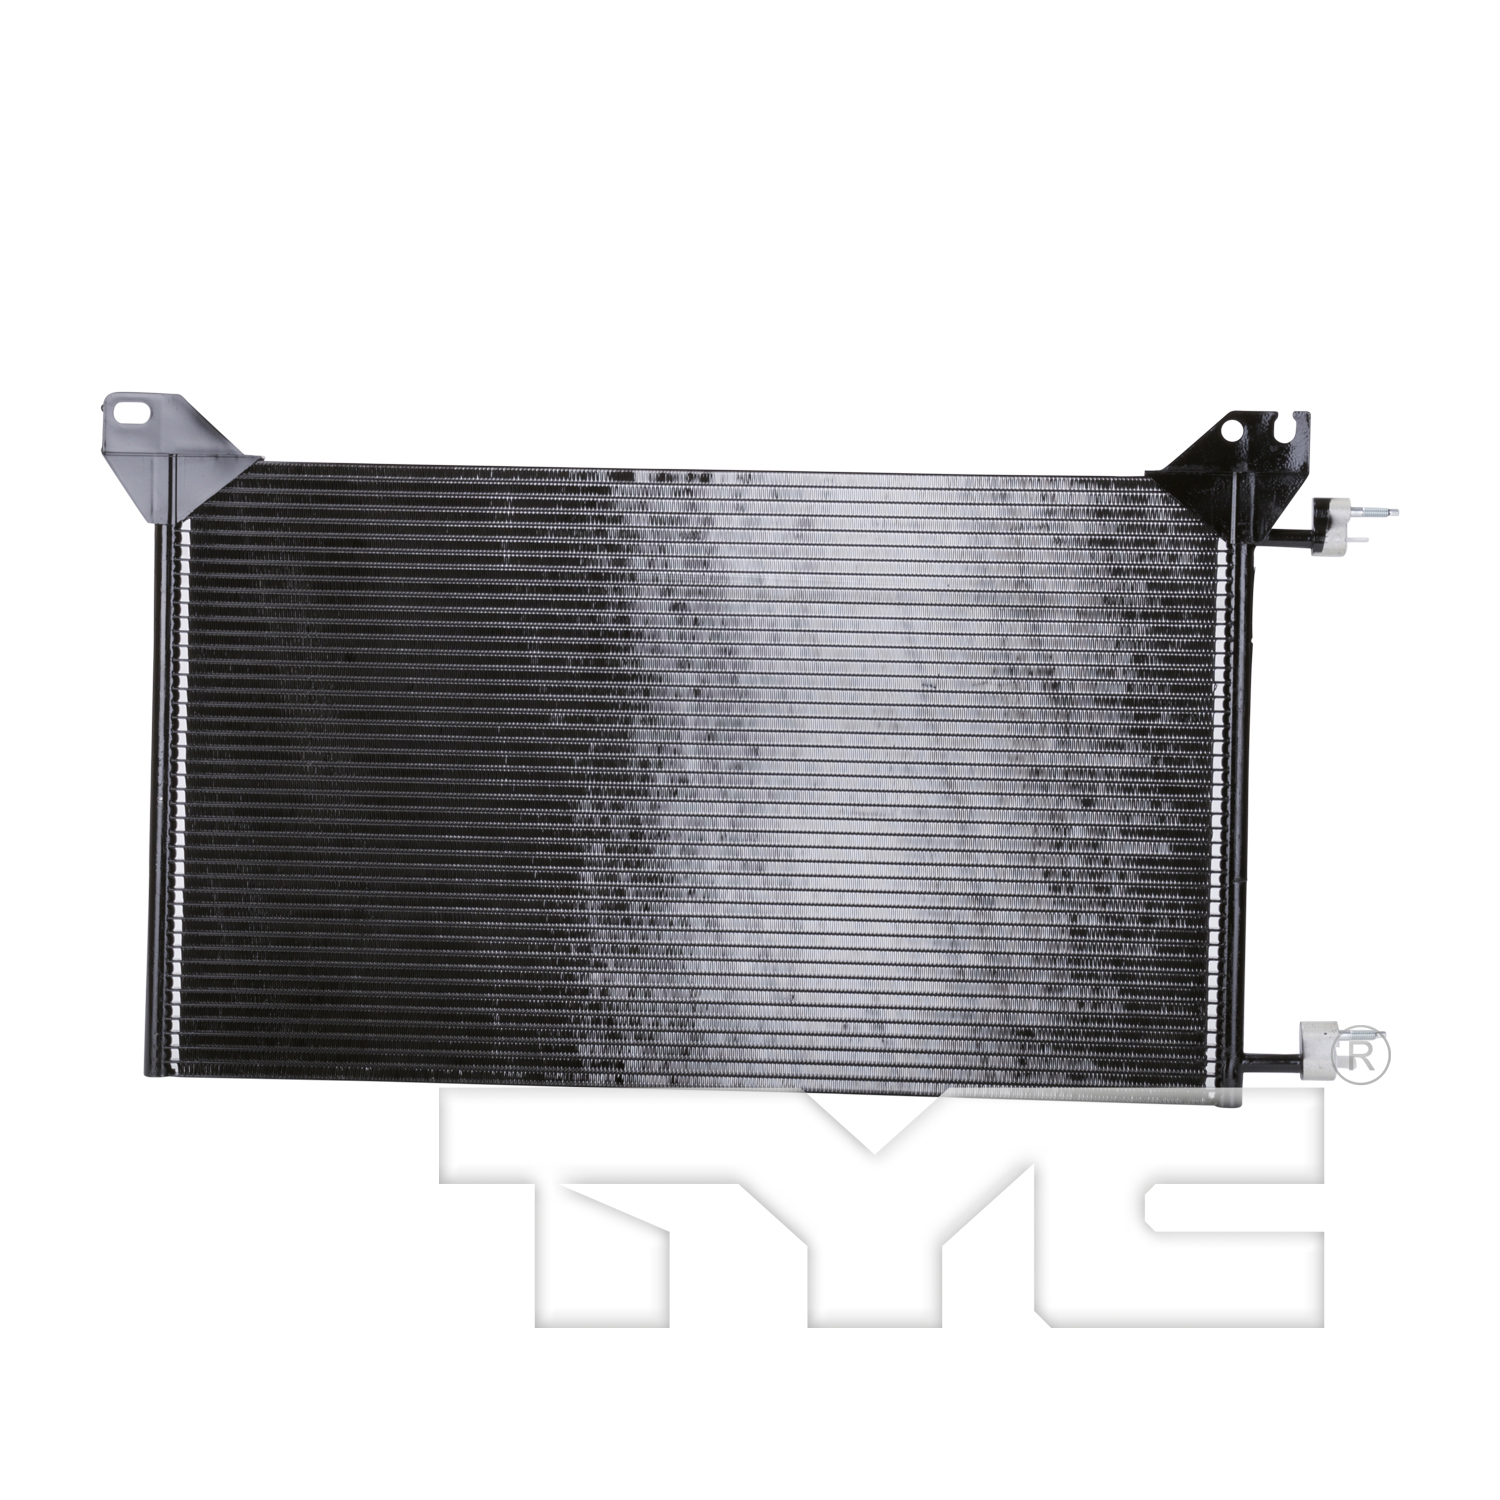 Aftermarket AC CONDENSERS for CHEVROLET - AVALANCHE 2500, AVALANCHE 2500,02-06,Air conditioning condenser